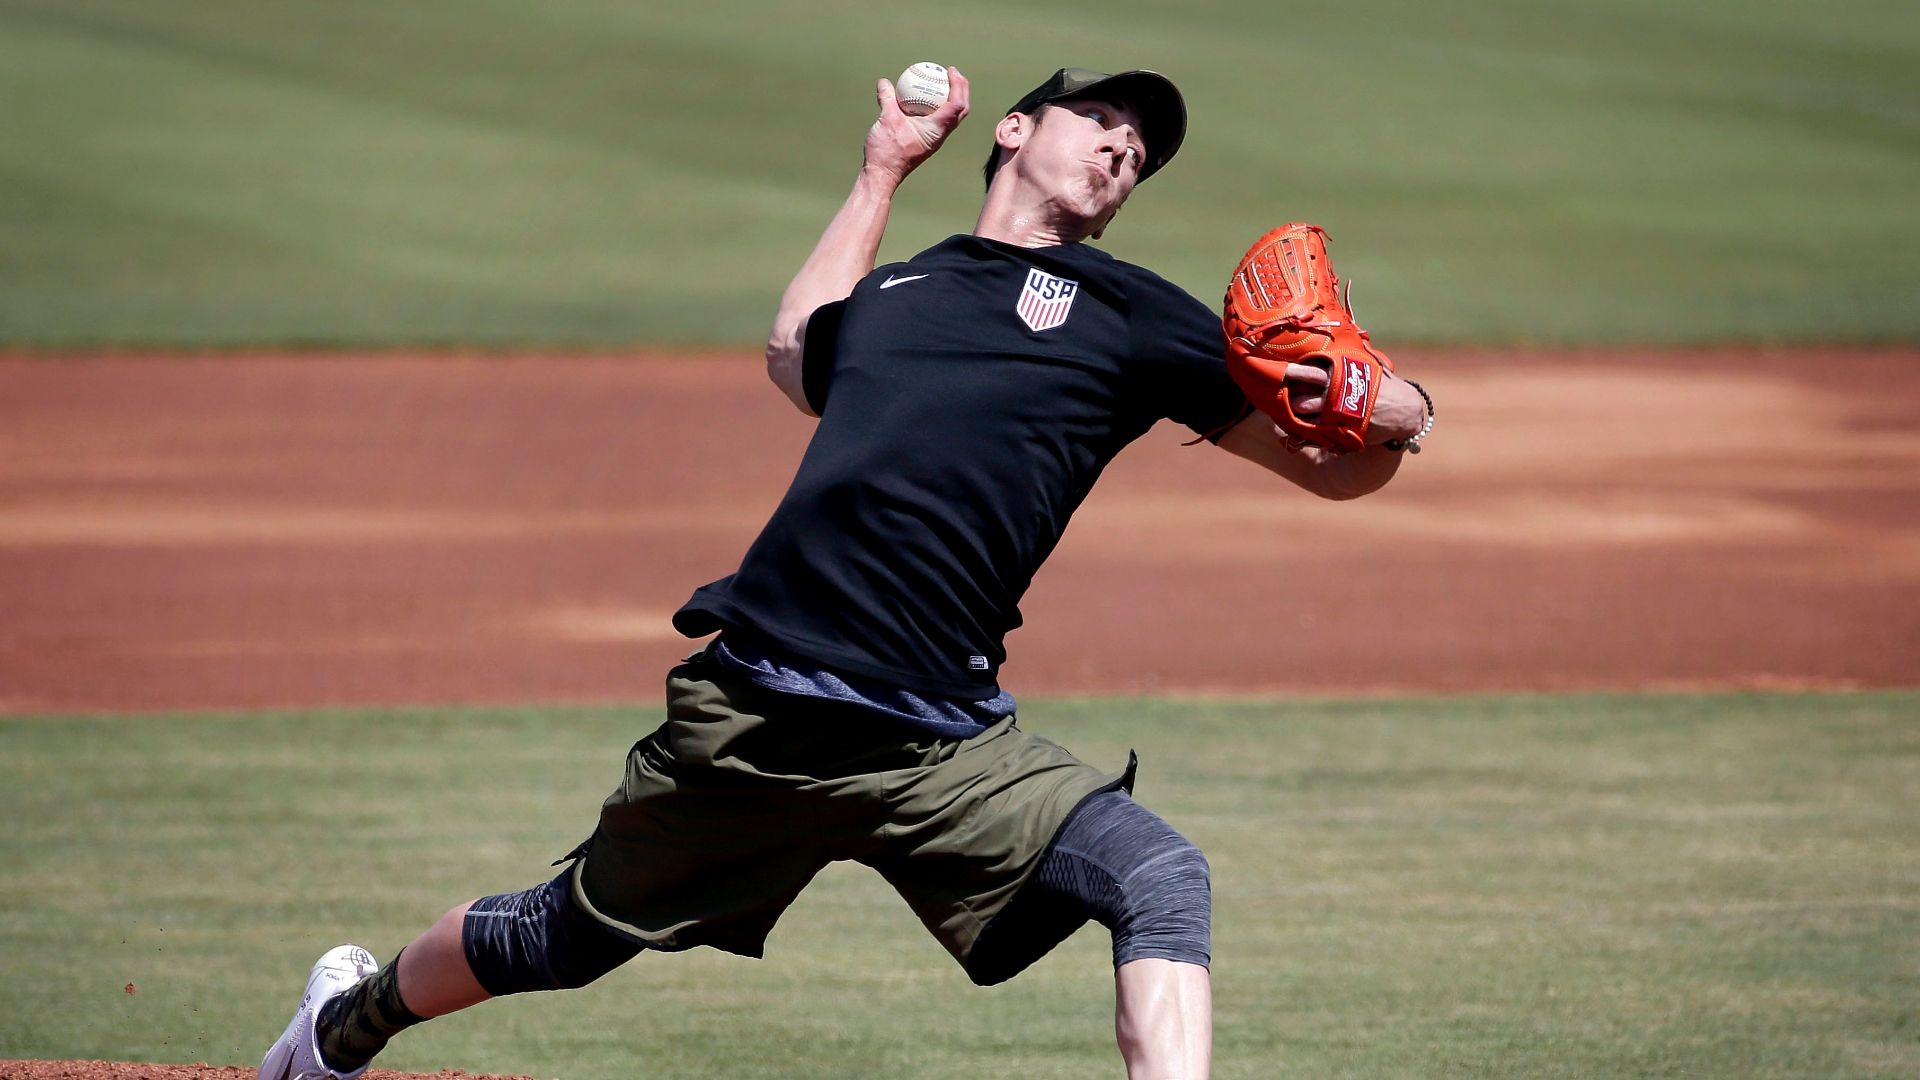 Tim Lincecum reportedly agrees to deal with Los Angeles Angels